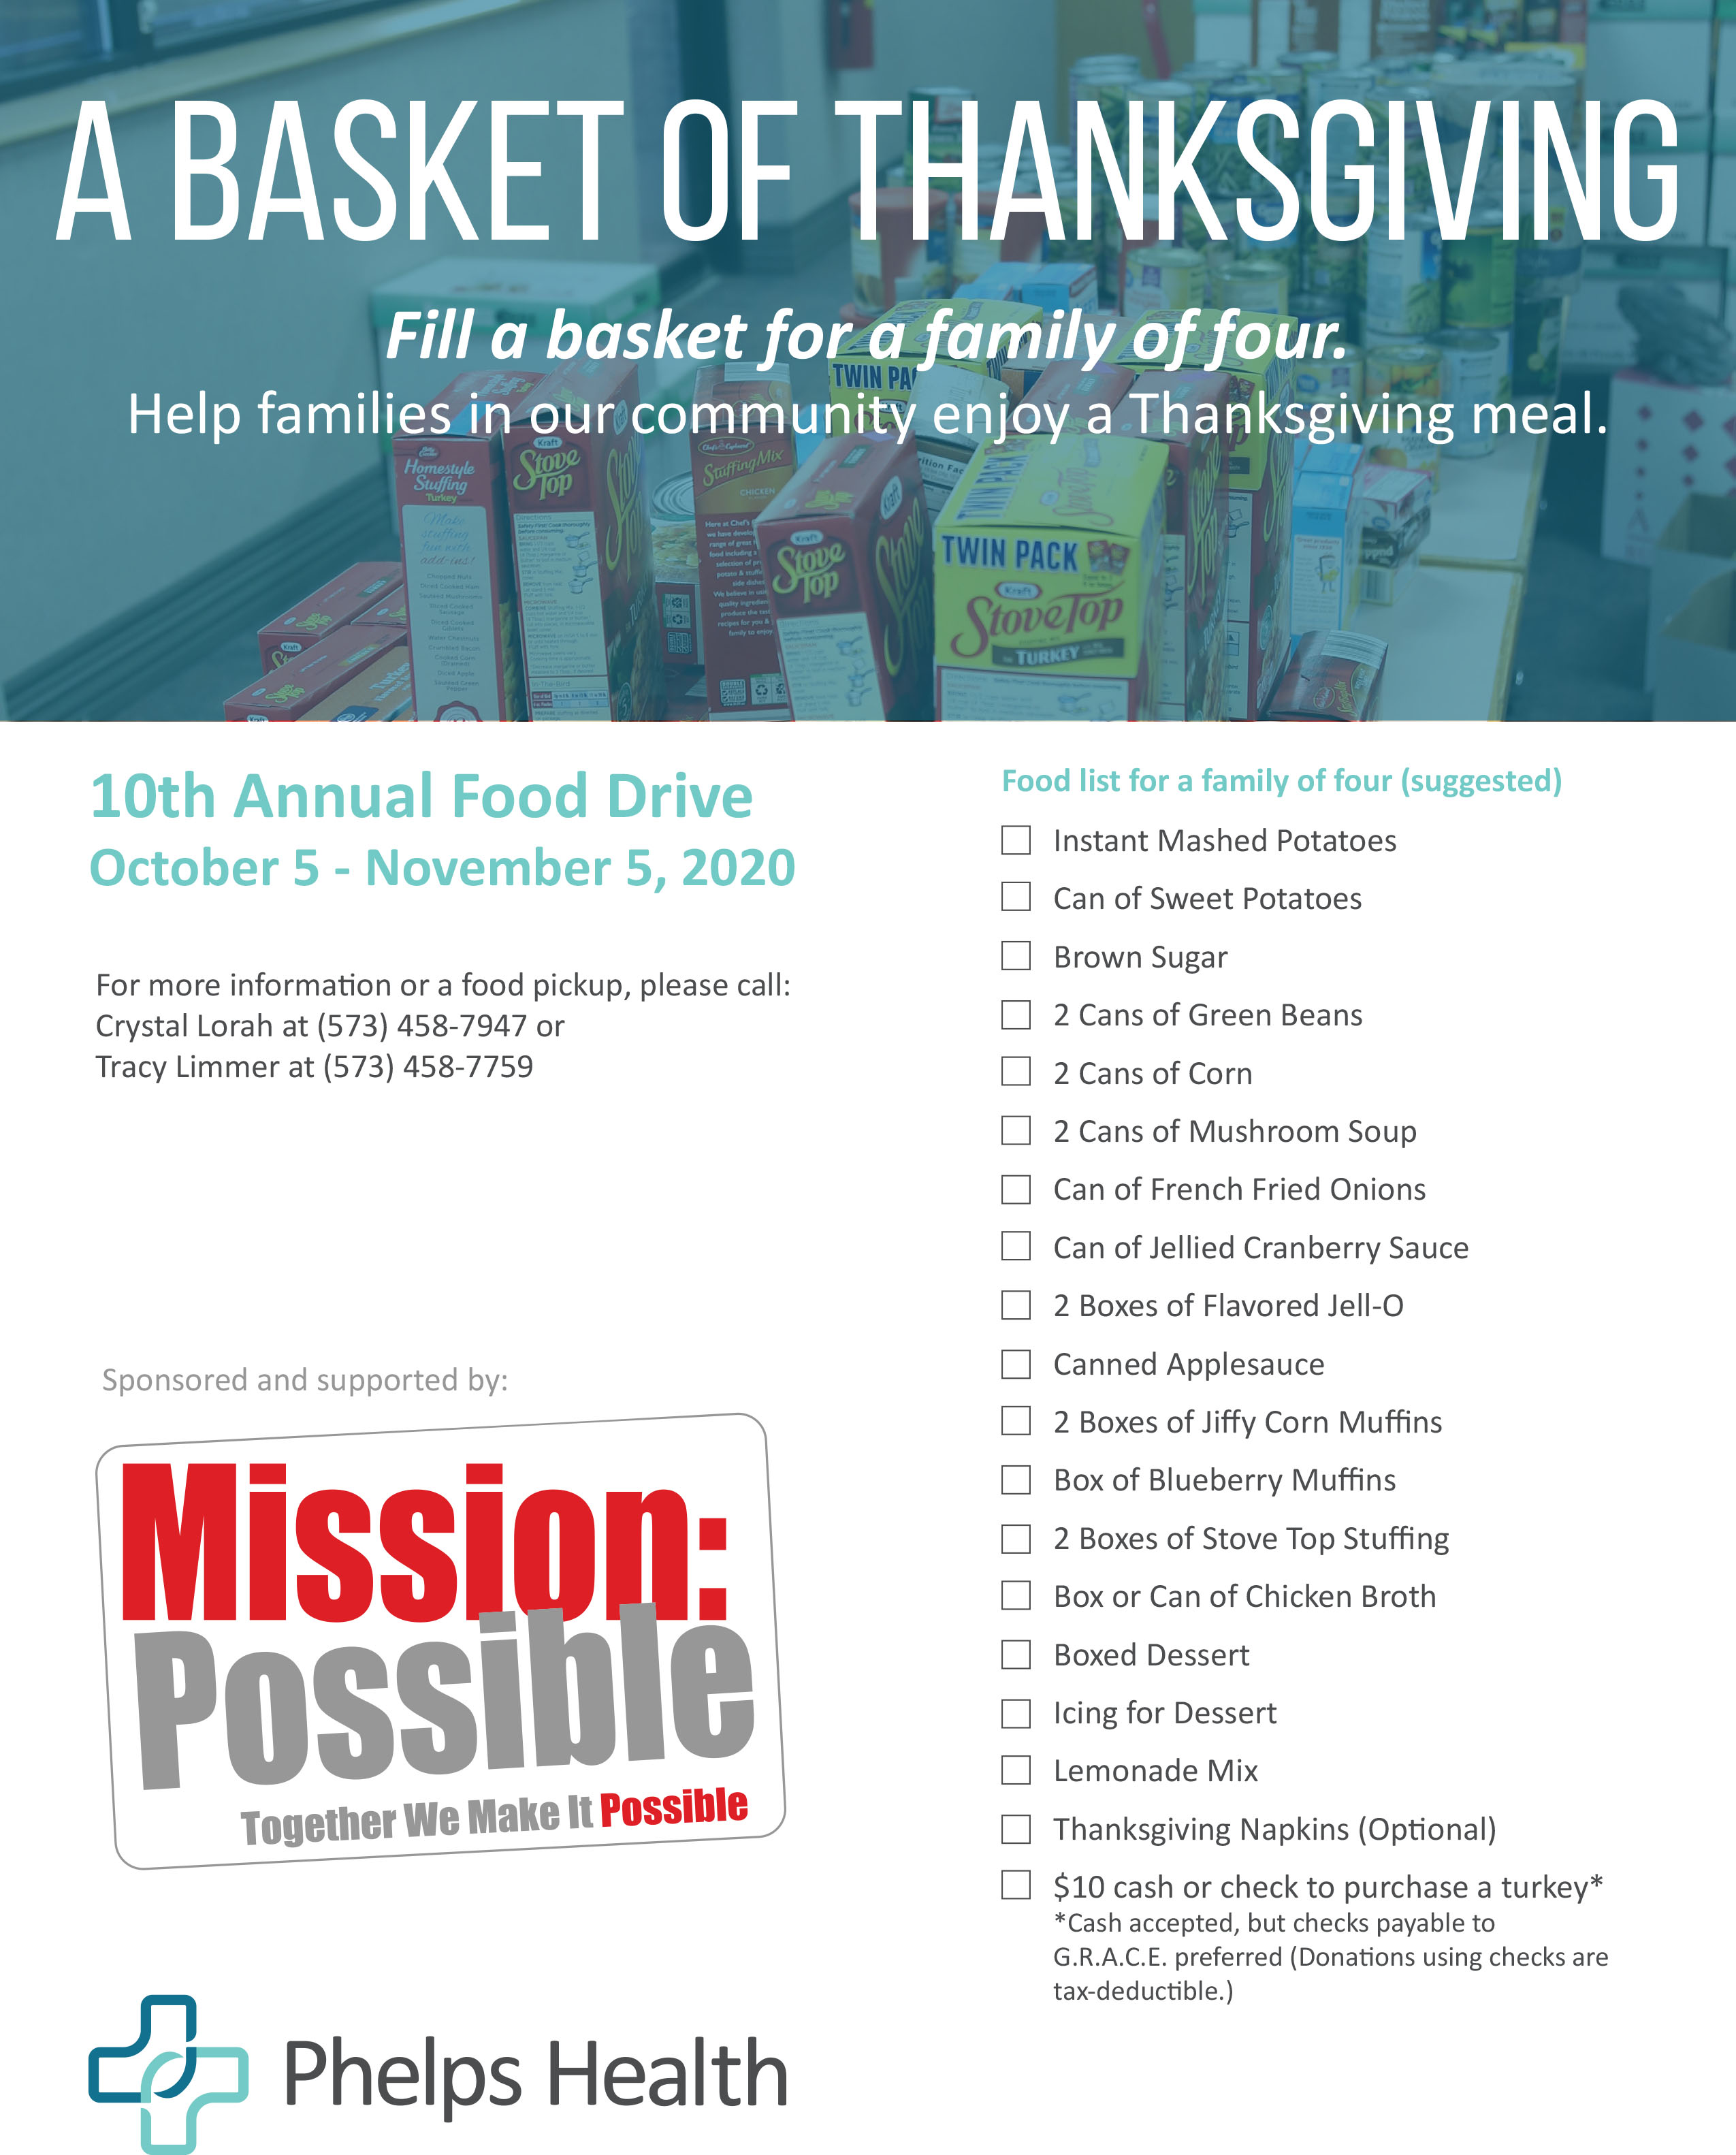 phelps-health-s-10th-annual-thanksgiving-food-drive-to-benefit-area